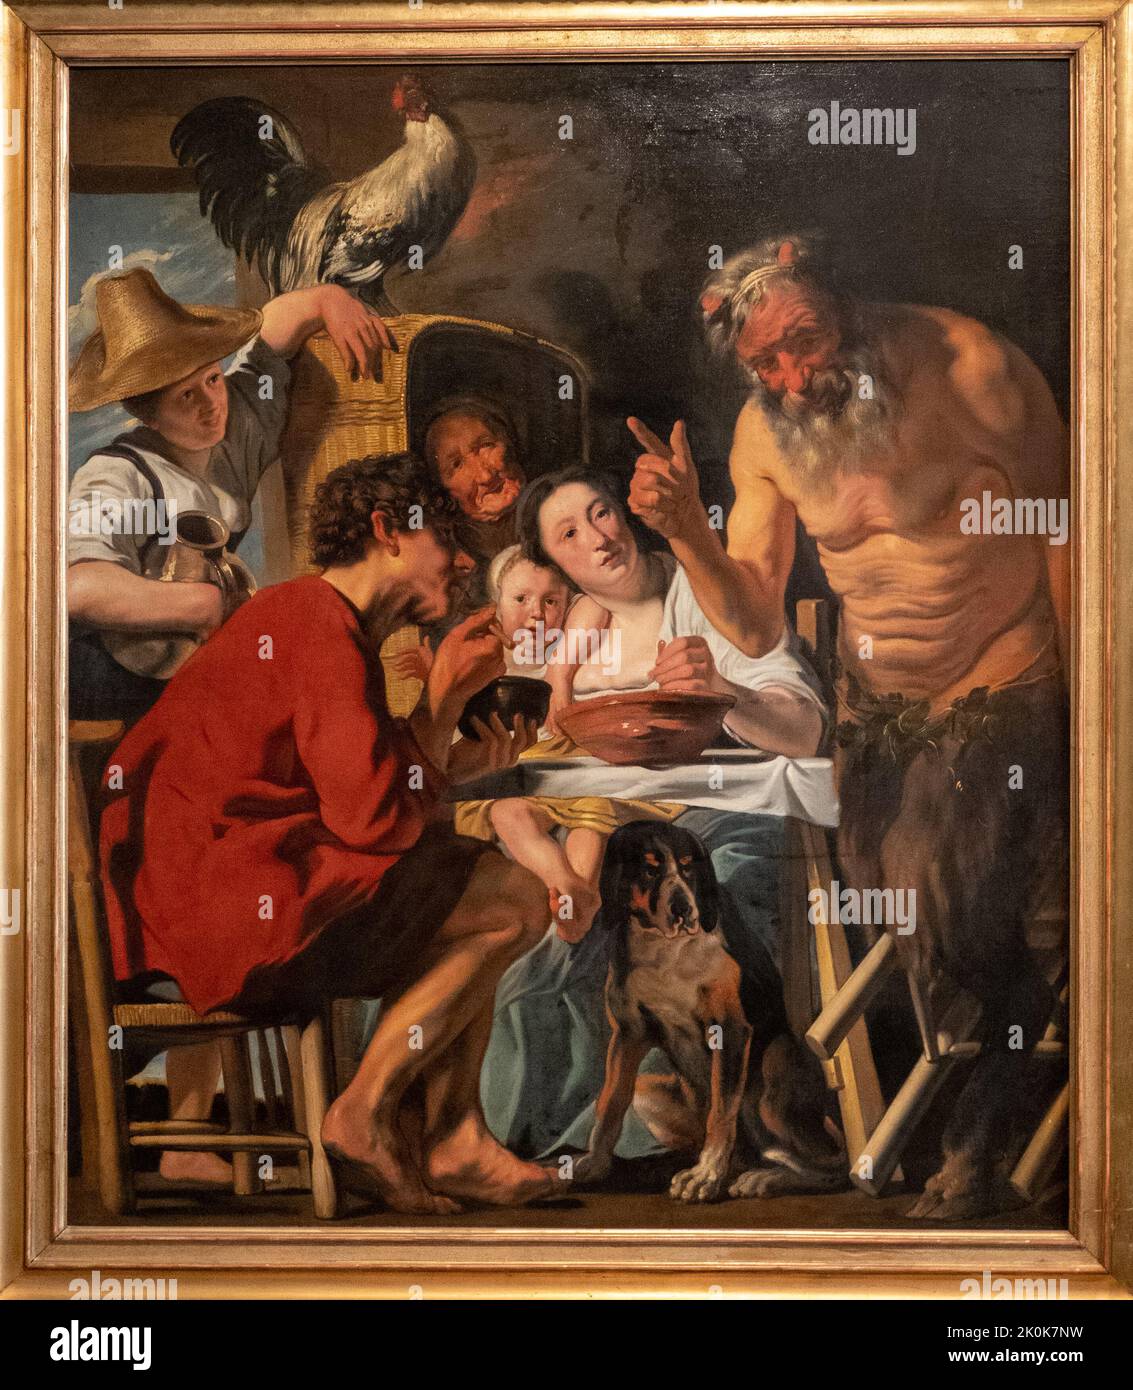 The Satyr and the Peasant by Jakob Jordaens, 1618-20 Stock Photo